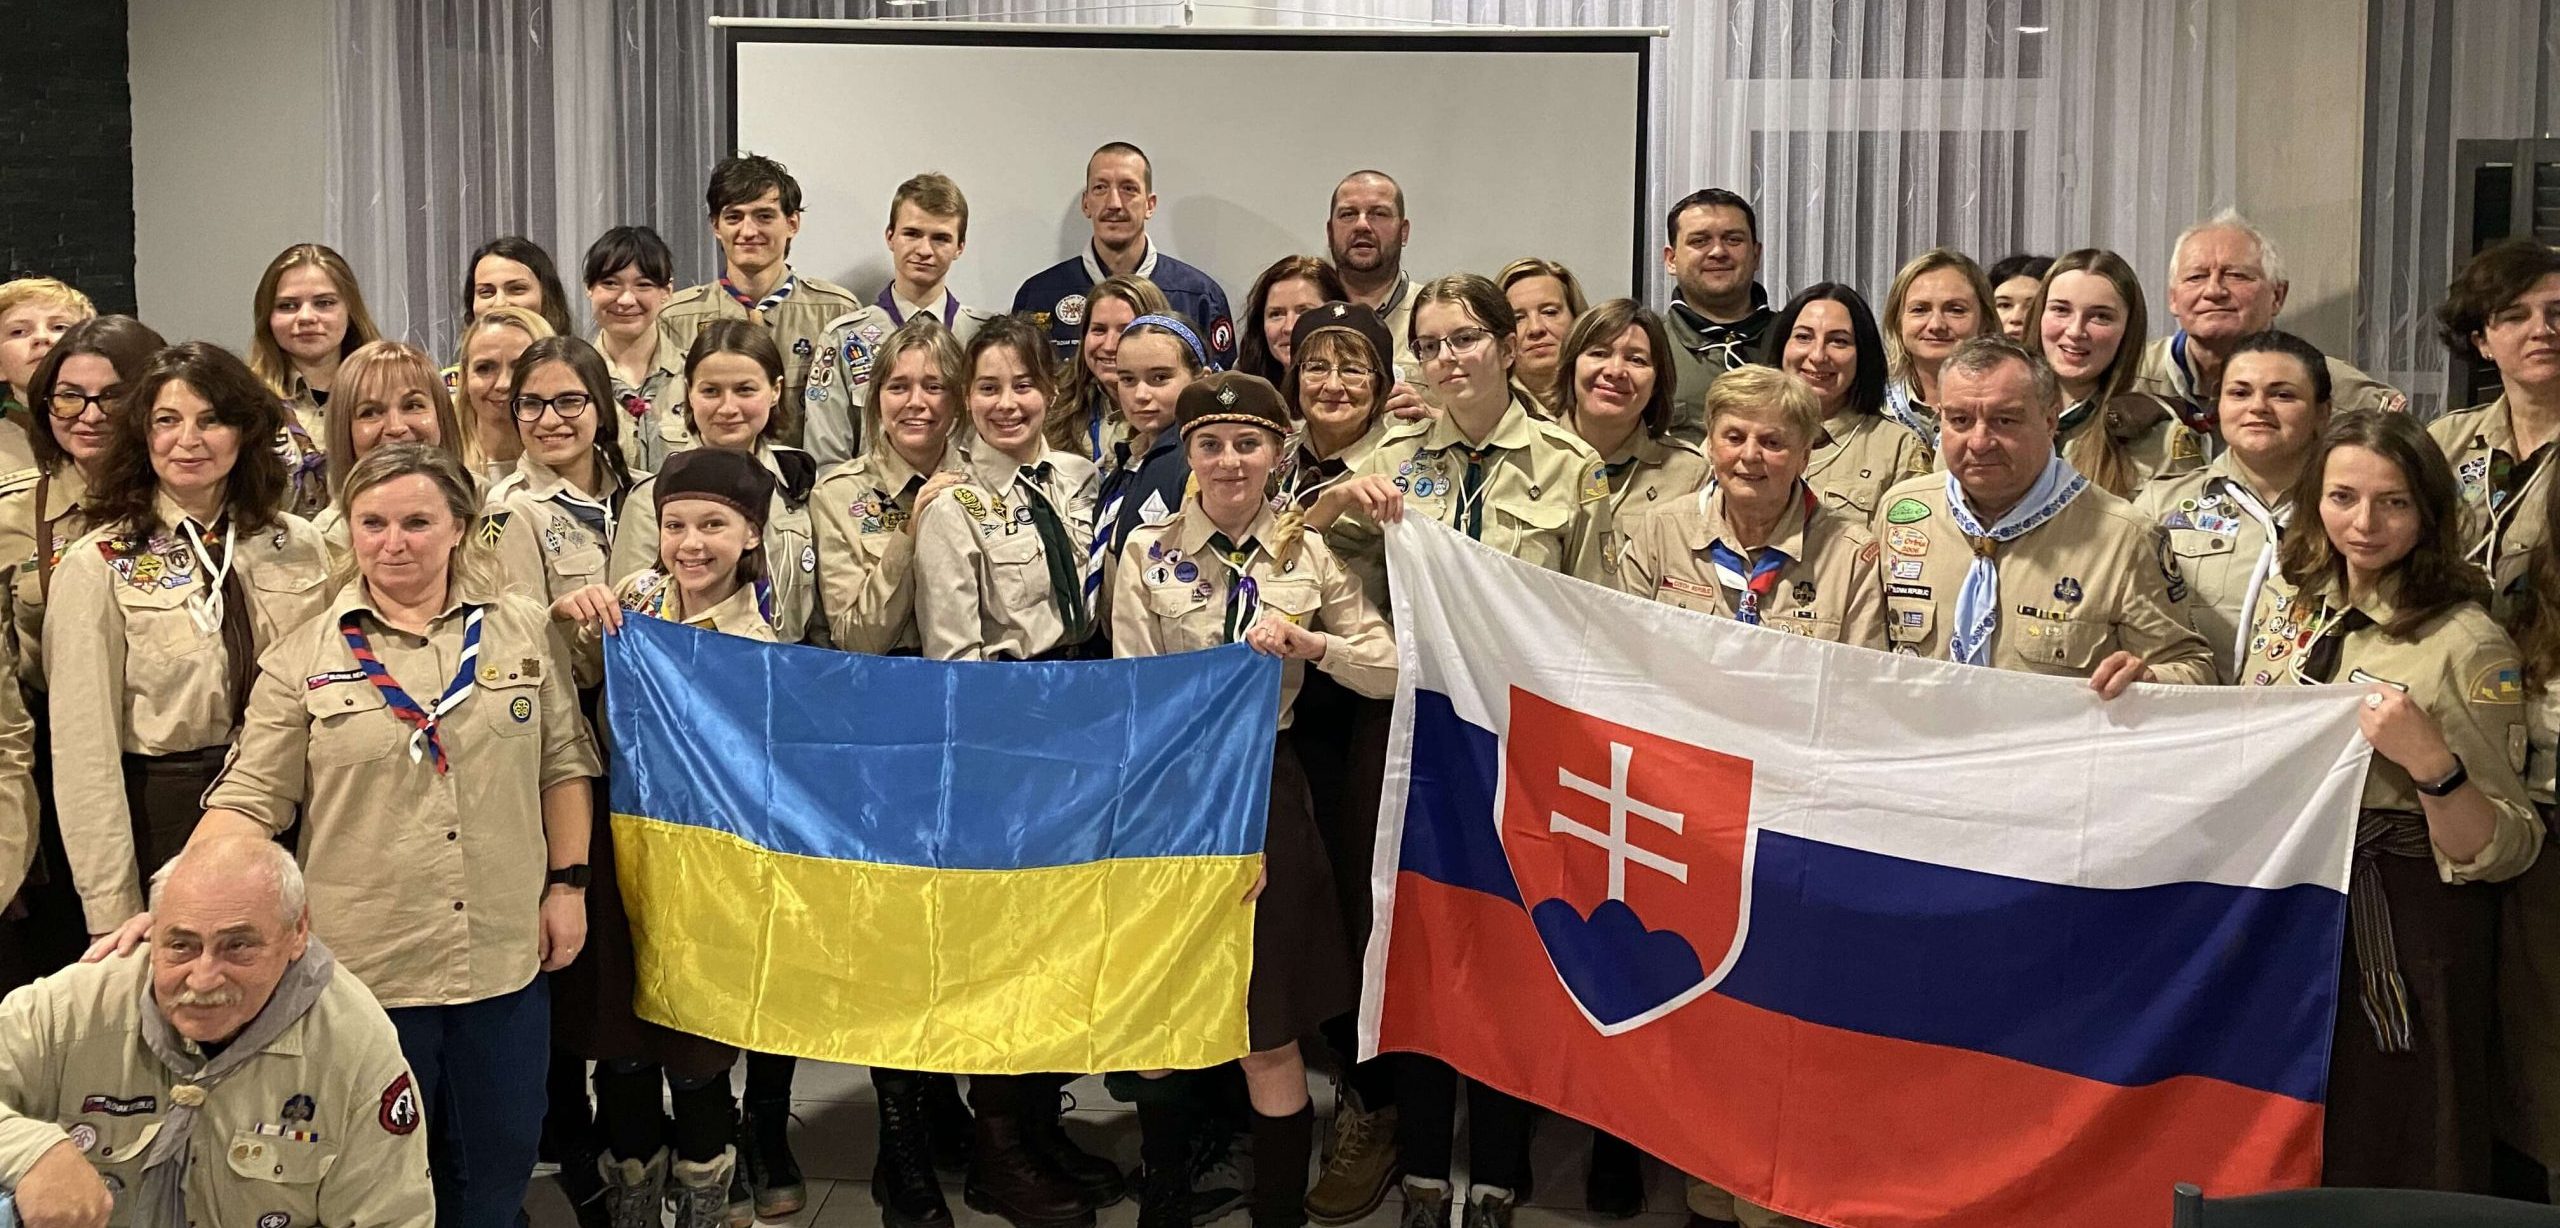 Members of Plast held a meeting with the scouts of Slovakia